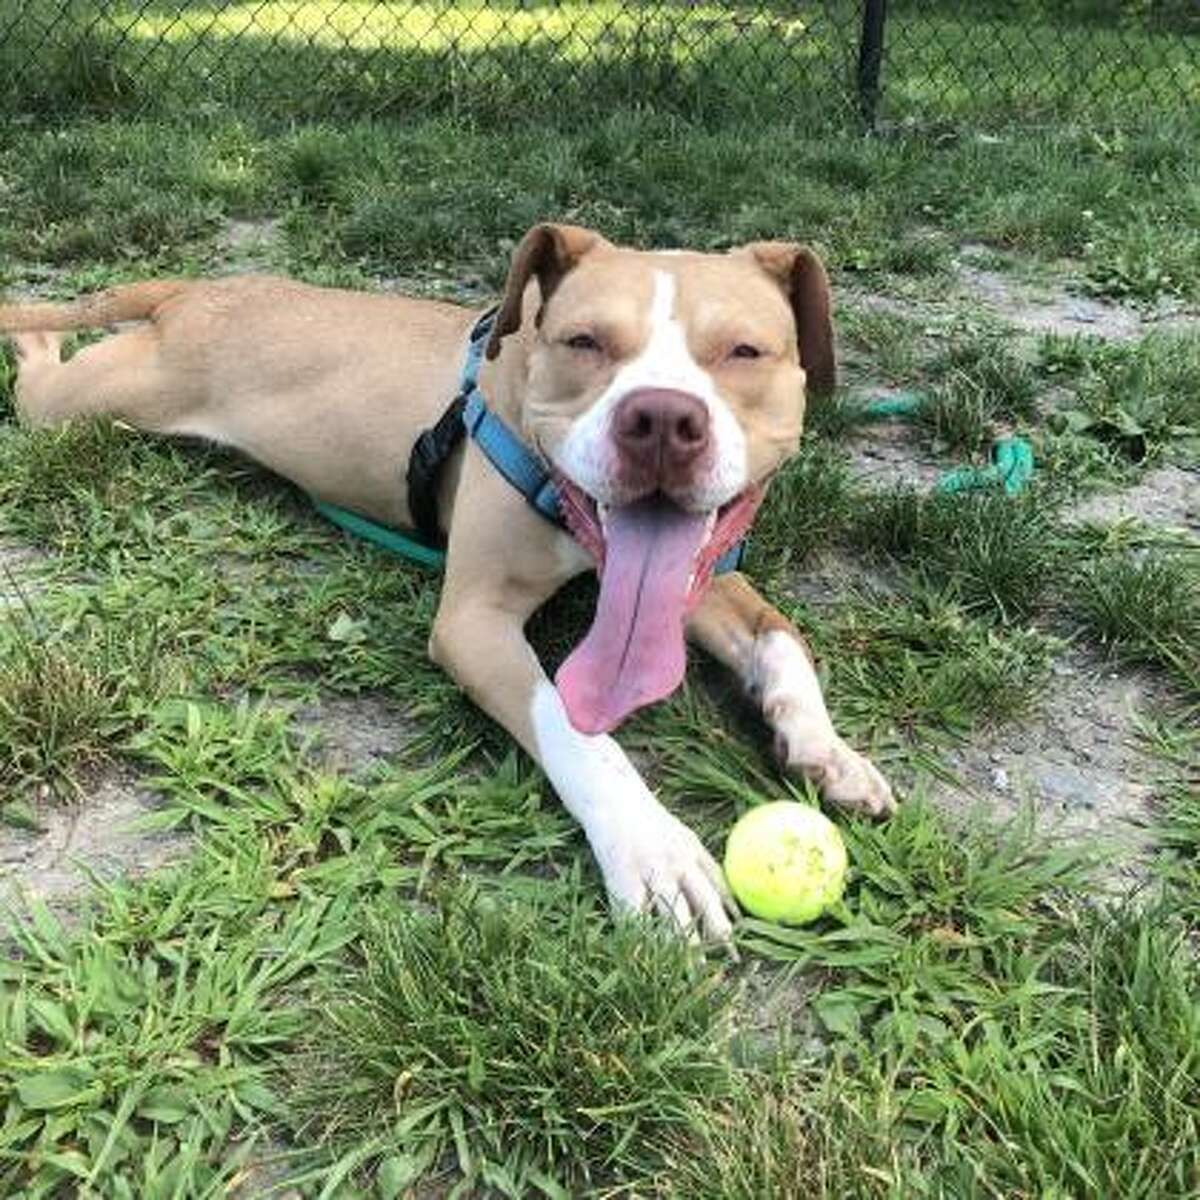 Abraham is a 1-year-old terrier pitbull mix.